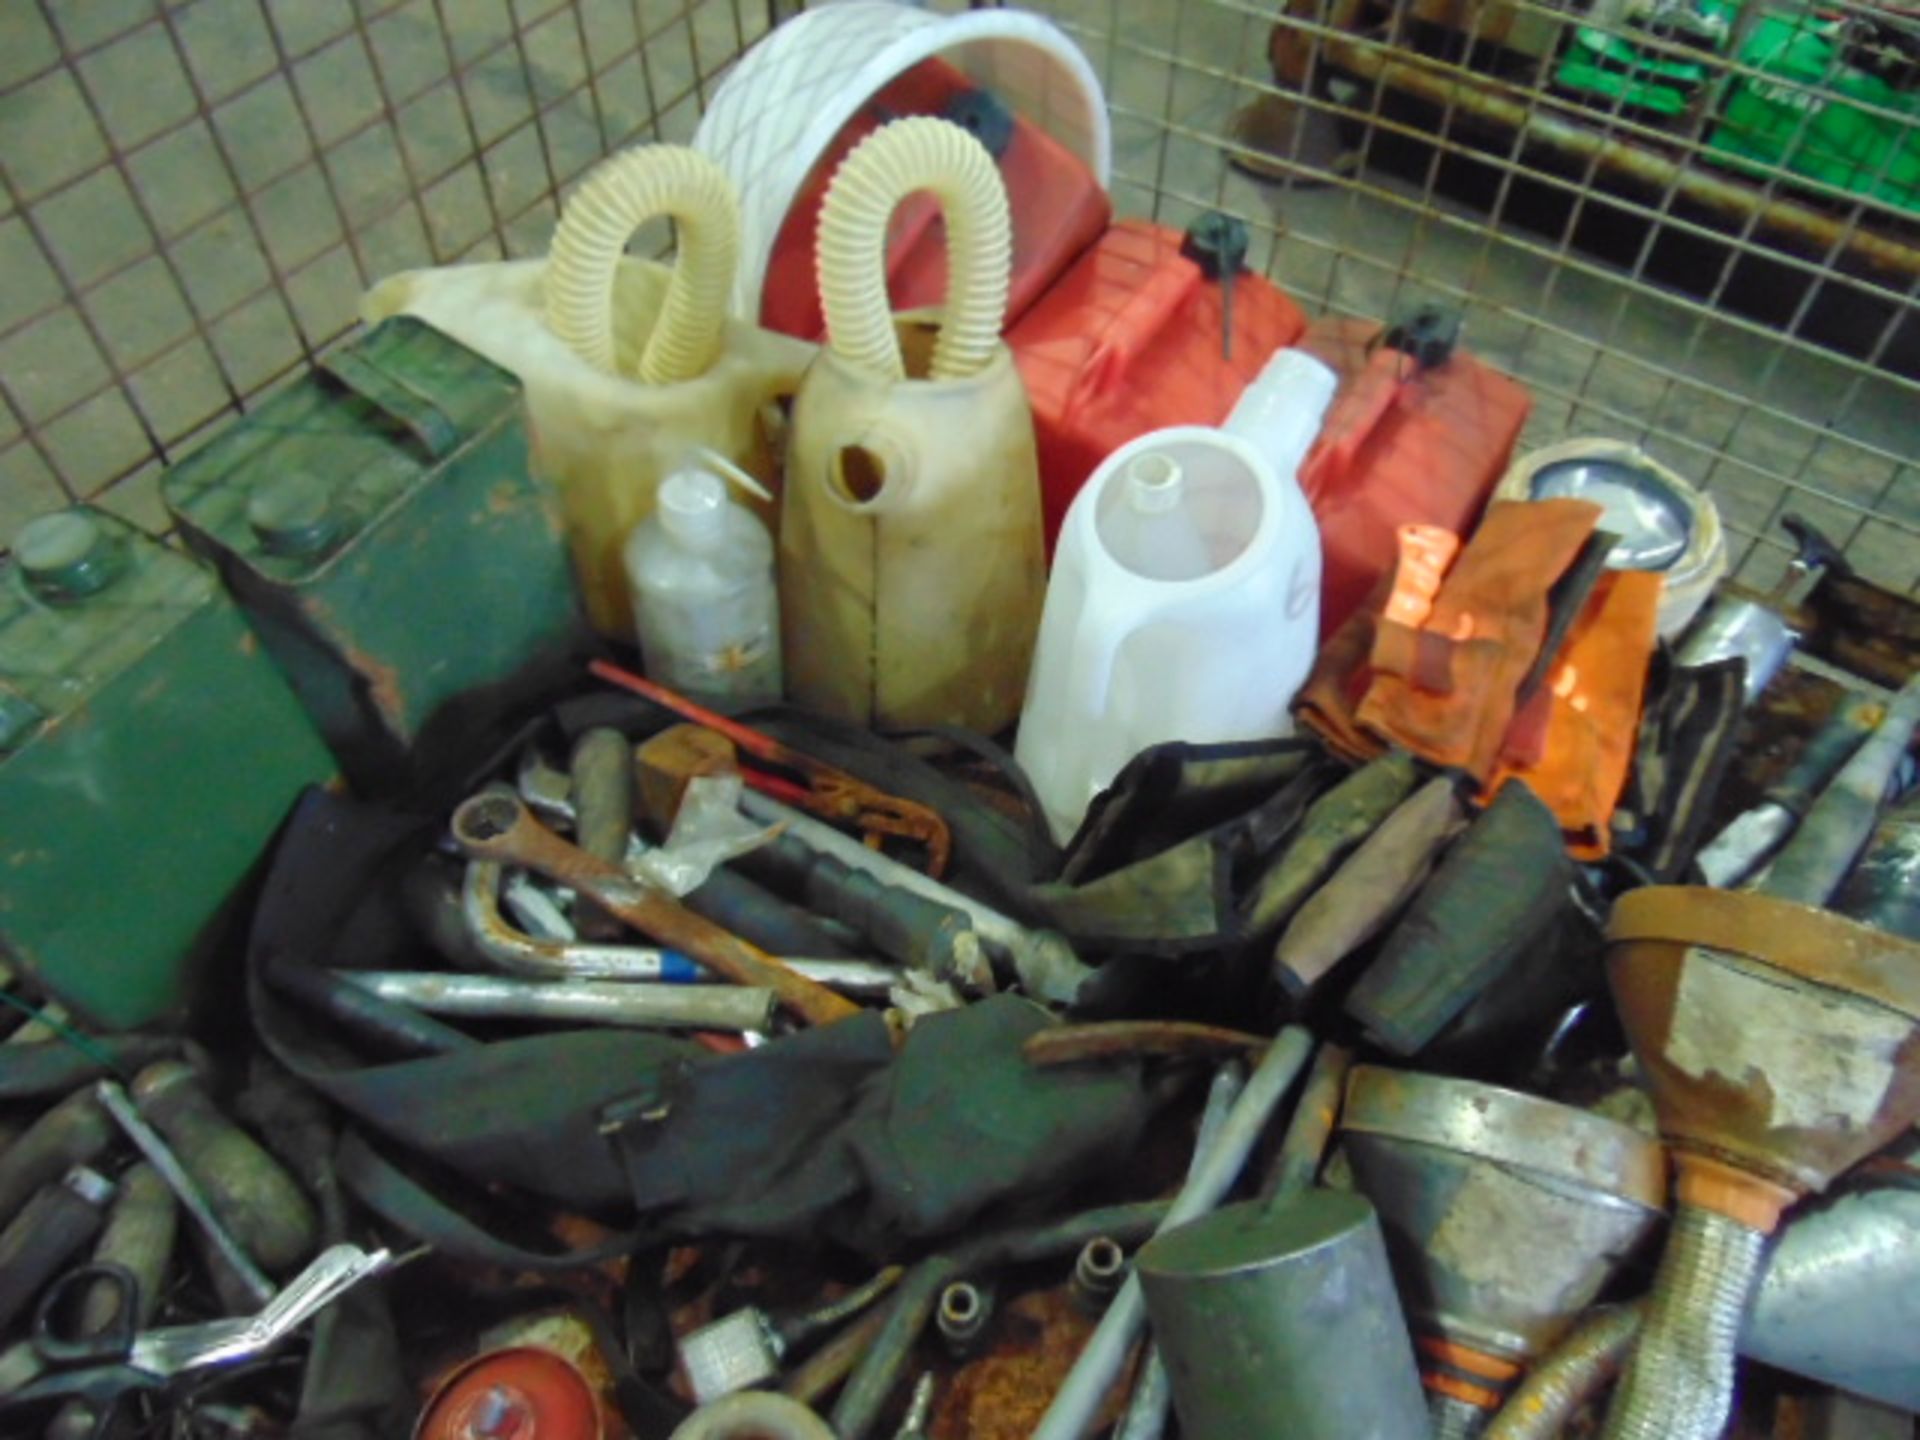 Stillage of Workshop Tools and Accessories - Image 3 of 4